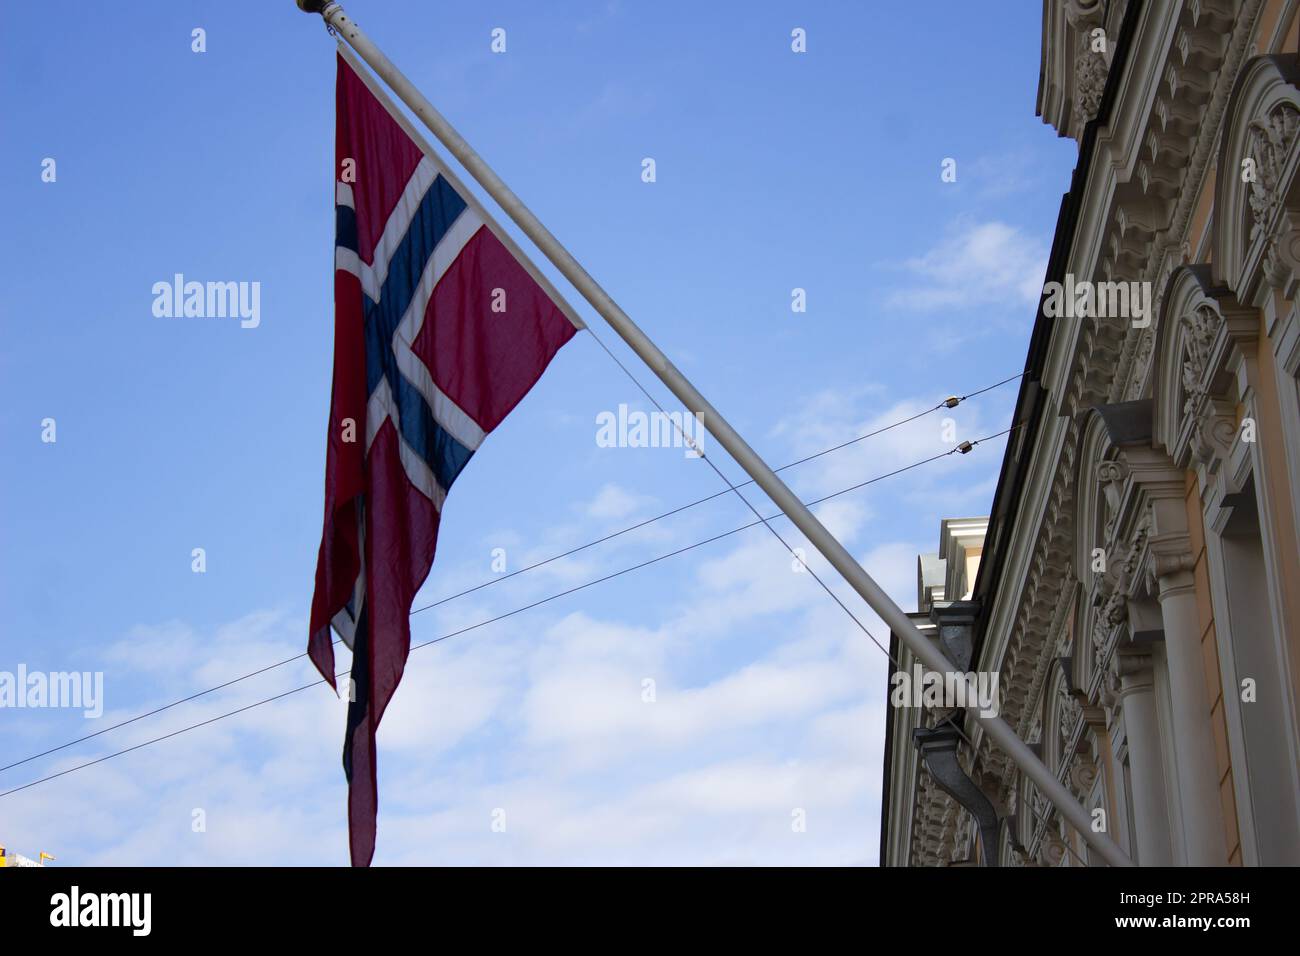 Moscow, Russia. 26th Apr, 2023. The national flag of Norway is seen above the embassy of the Kingdom of Norway in Moscow. Russia has made a decision to expel ten diplomats from Norway's Moscow embassy, according to the Russian Foreign Ministry. The decision followed the announcement on April 13 2023 that the Norwegian authorities had expelled 15 Russian embassy officials. (Photo by Vlad Karkov/SOPA Images/Sipa USA) Credit: Sipa USA/Alamy Live News Stock Photo